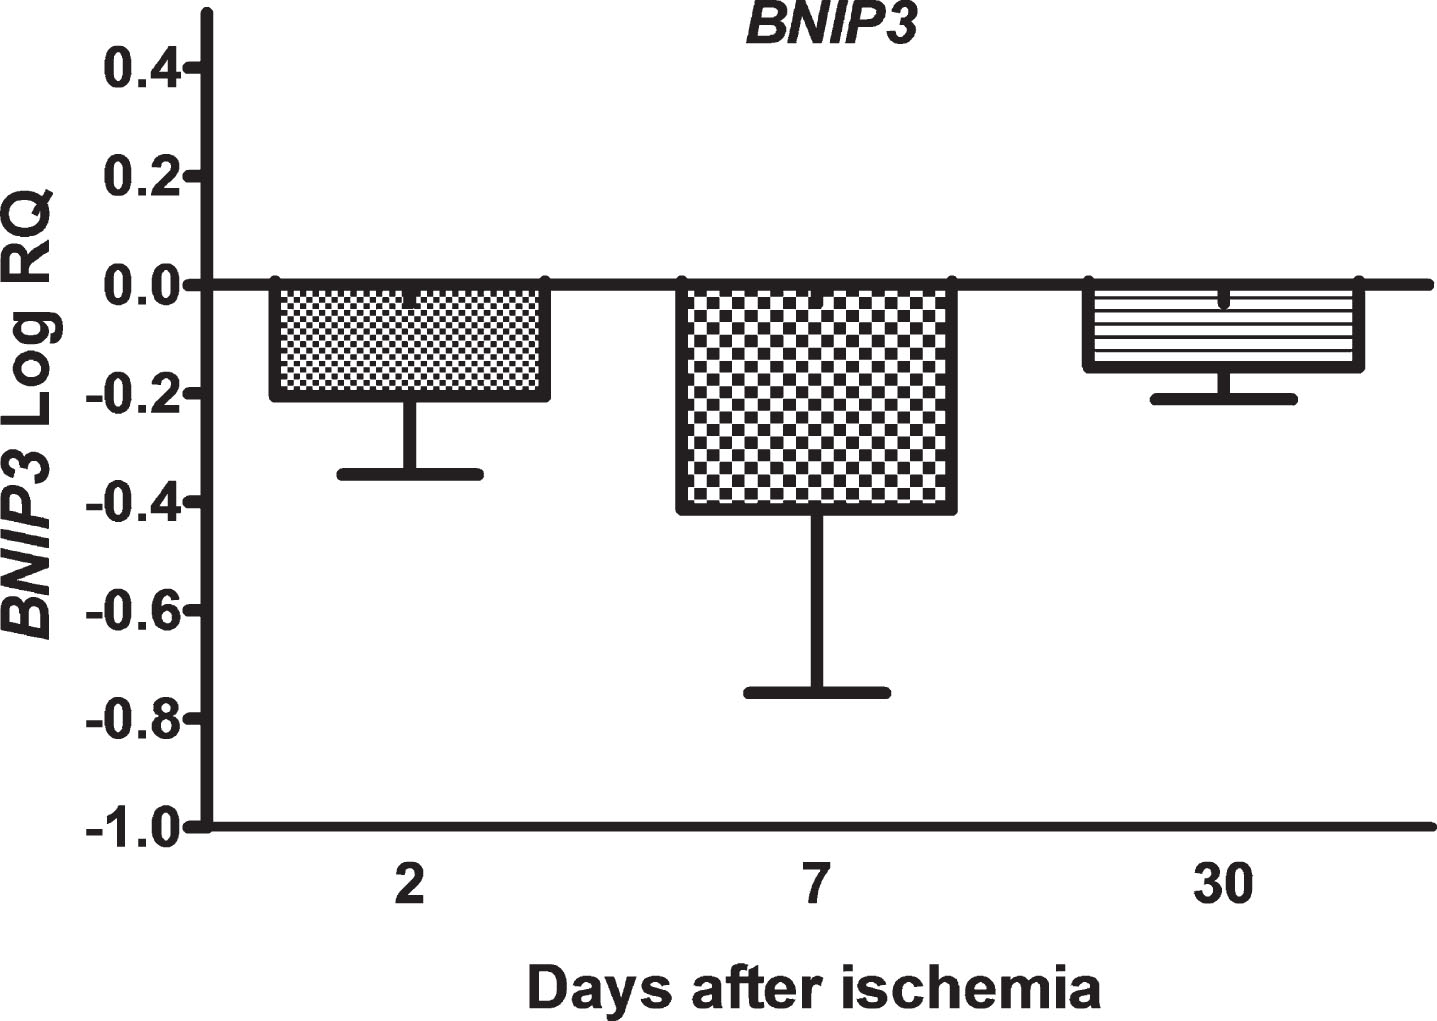 The mean expression levels of BNIP3 gene in the hippocampus CA3 area 2 (n = 8), 7 (n = 8) and 30 (n = 8) days after brain ischemia. Marked SD, standard deviation. No statistical significance at all times after ischemia (Kruskal-Wallis test).